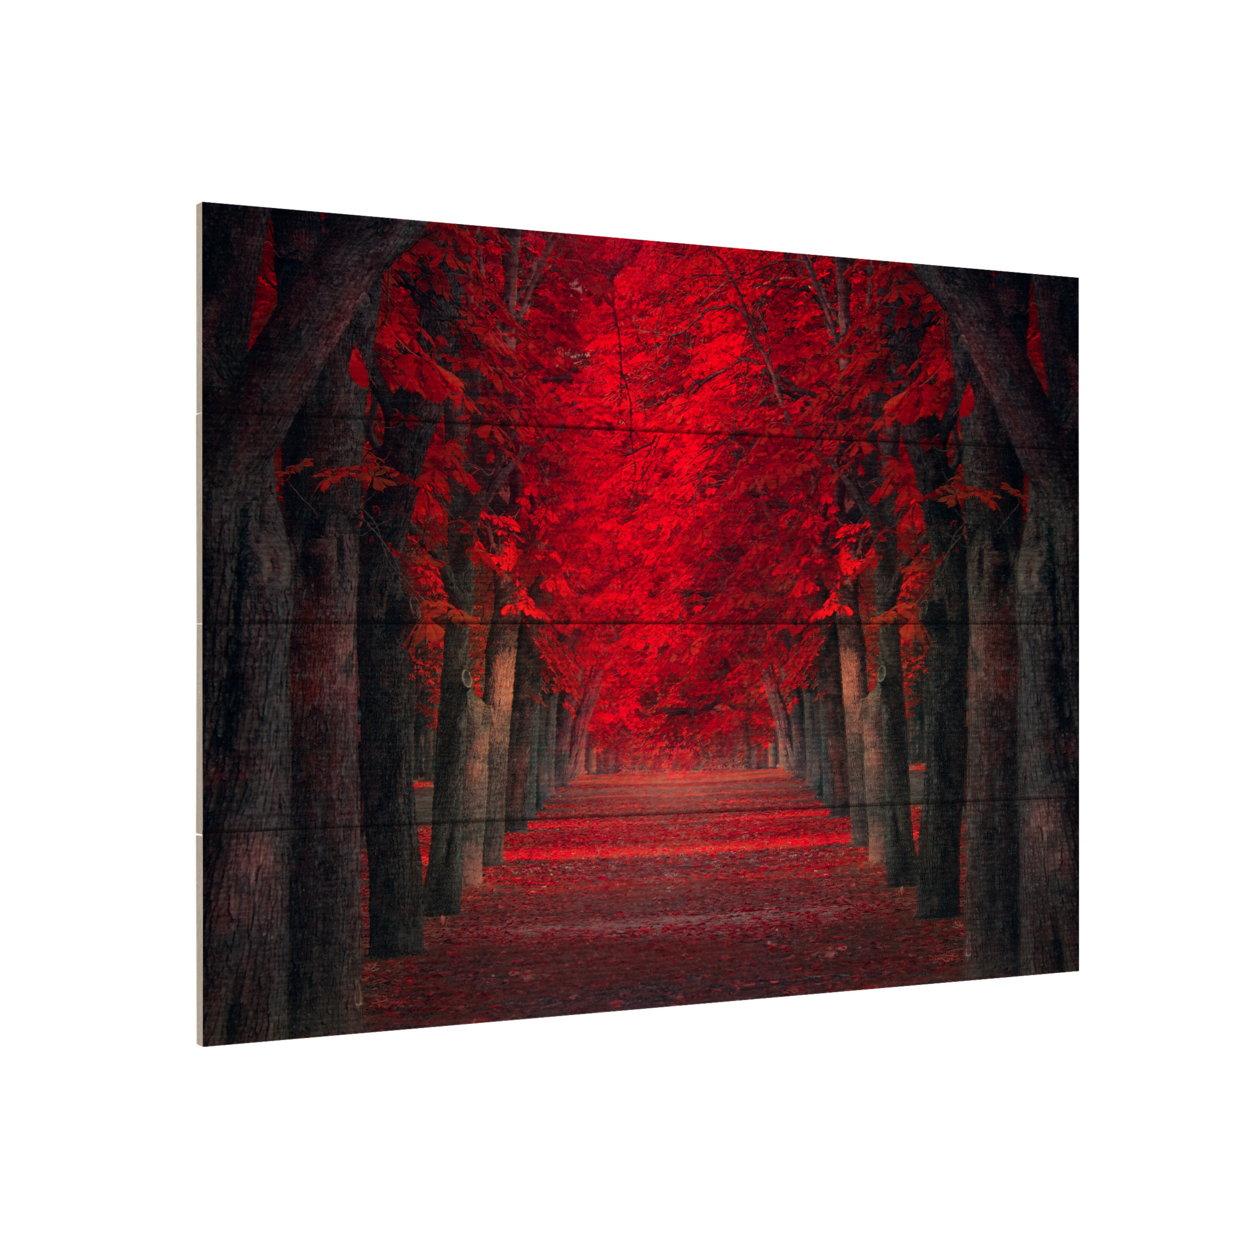 Wall Art 12 X 16 Inches Titled Endless Passion Ready To Hang Printed On Wooden Planks